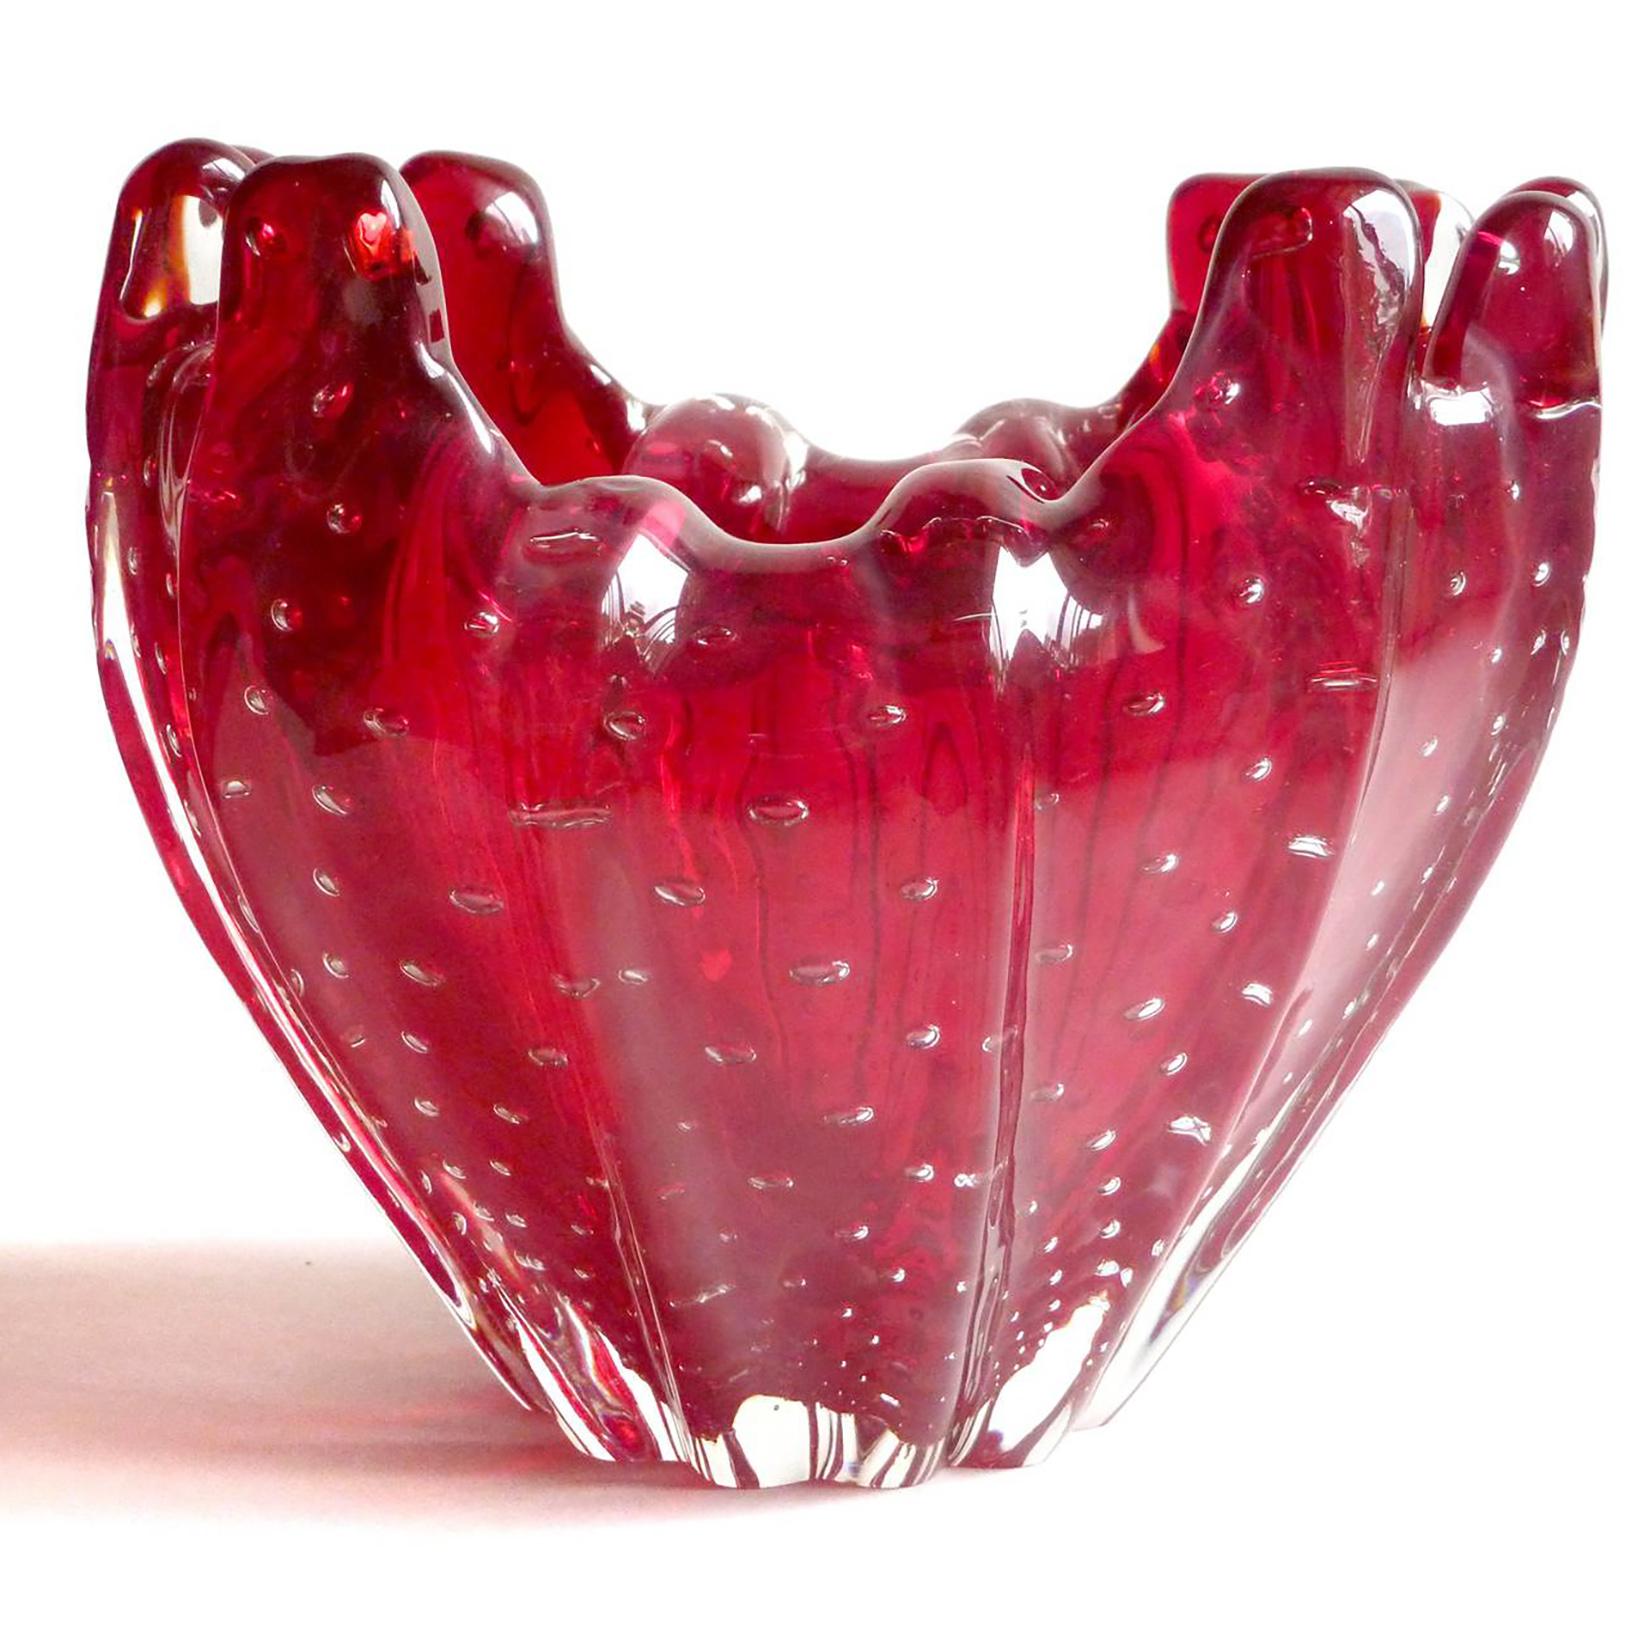 Beautiful vintage Murano hand blown, deep red and controlled bubbles Italian art glass signed sculptural vase. Documented to the Venini Company, and attributed to designer Paolo Venini, circa 1948. It is fully signed 